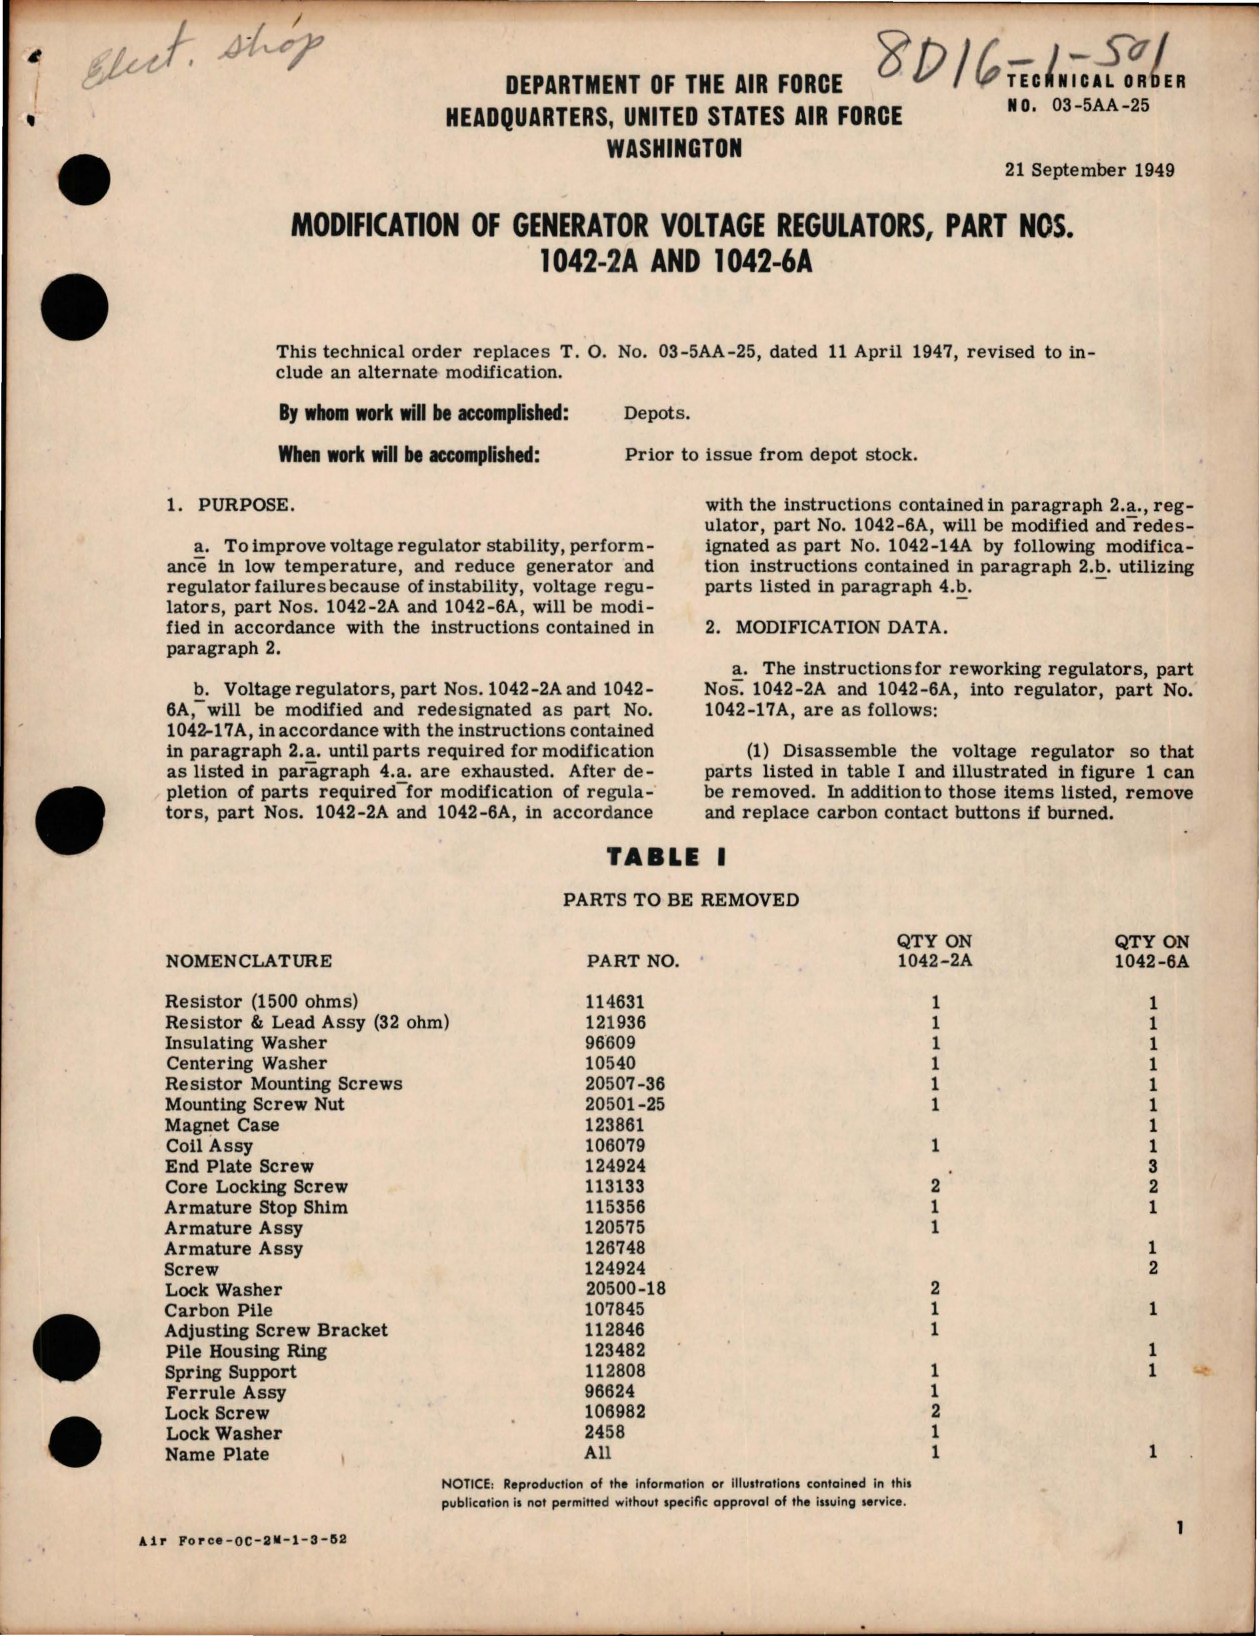 Sample page 1 from AirCorps Library document: Modification of Generator Voltage Regulators - Parts 1042-2A and 1042-6A